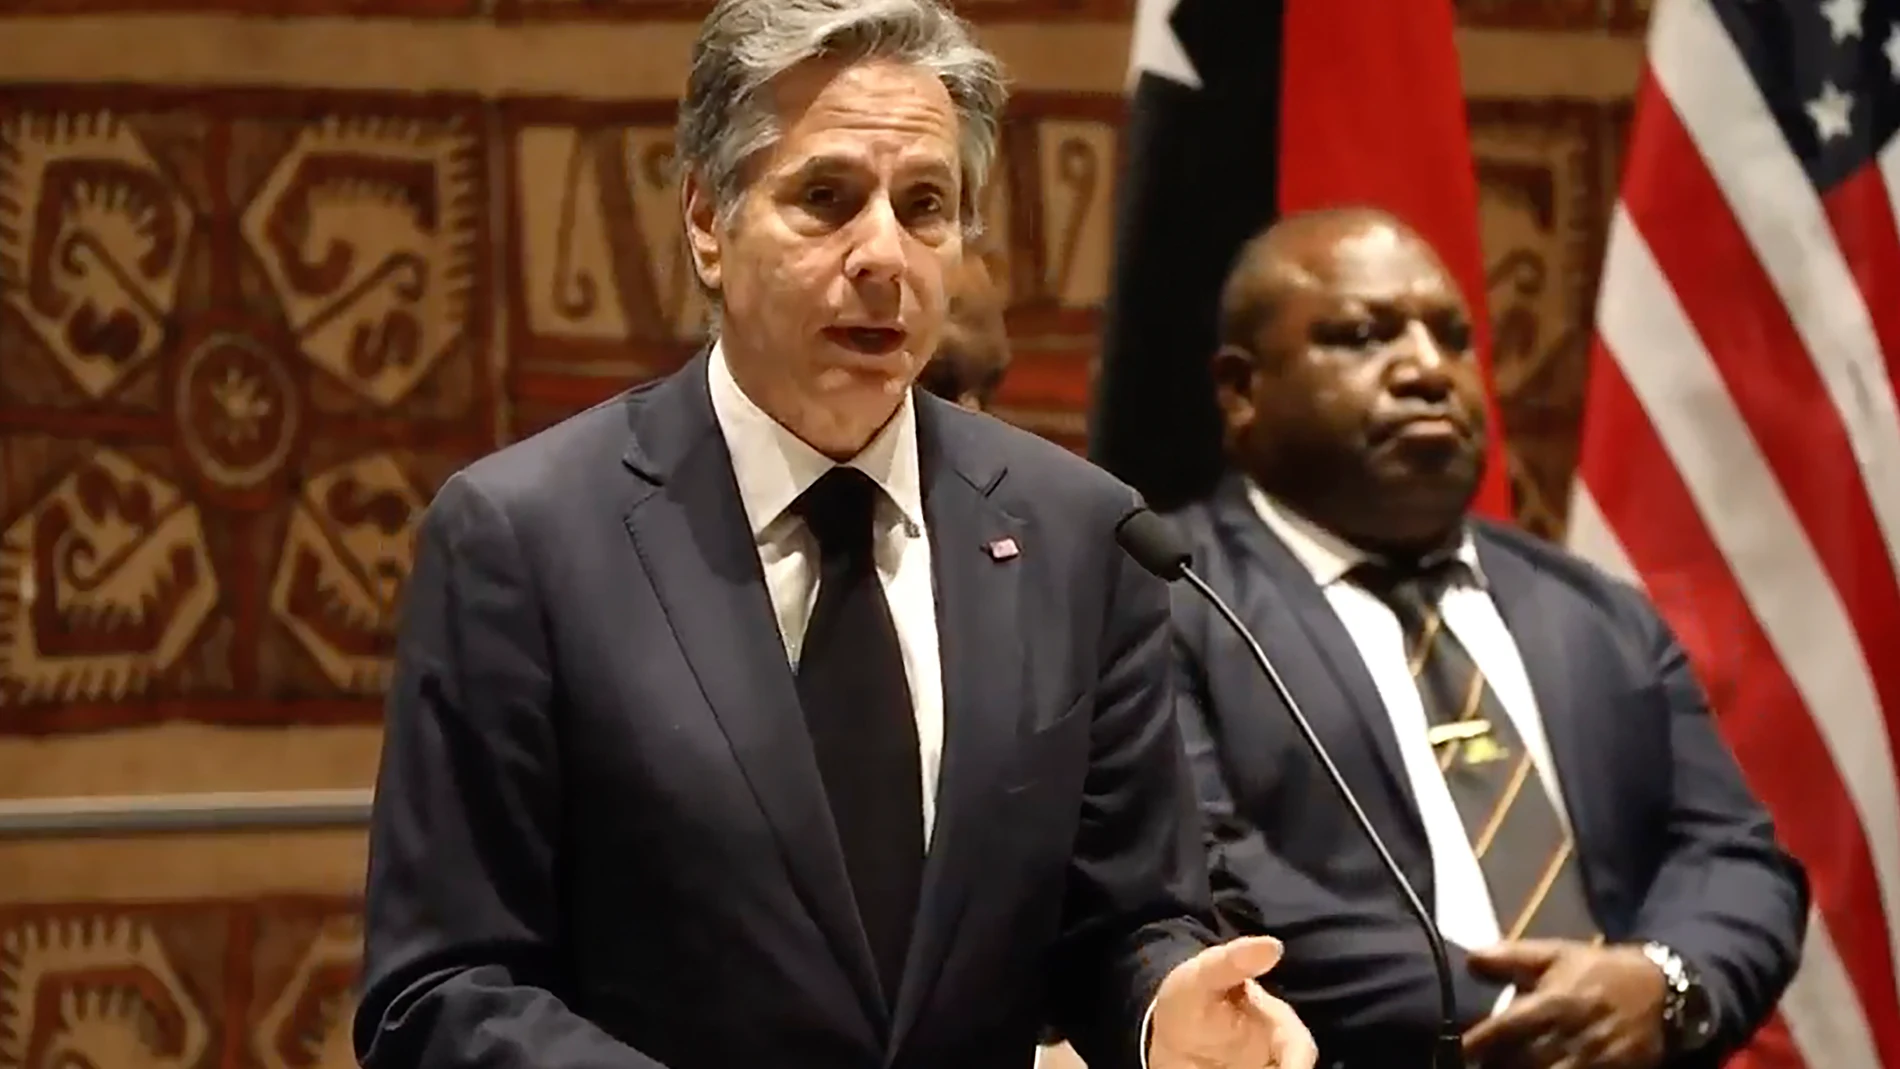 In this image made from video, U.S. Secretary of State Antony Blinken, left, delivers his speech in Port Moresby, Papua New Guinea Monday, May 22, 2023. The United States signed a new security pact with Papua New Guinea on Monday as it competes with China for influence in the Pacific. The United States signed a new security pact with Papua New Guinea on Monday as it competes with China for influence in the Pacific. (Australian Broadcasting Corp. via AP)